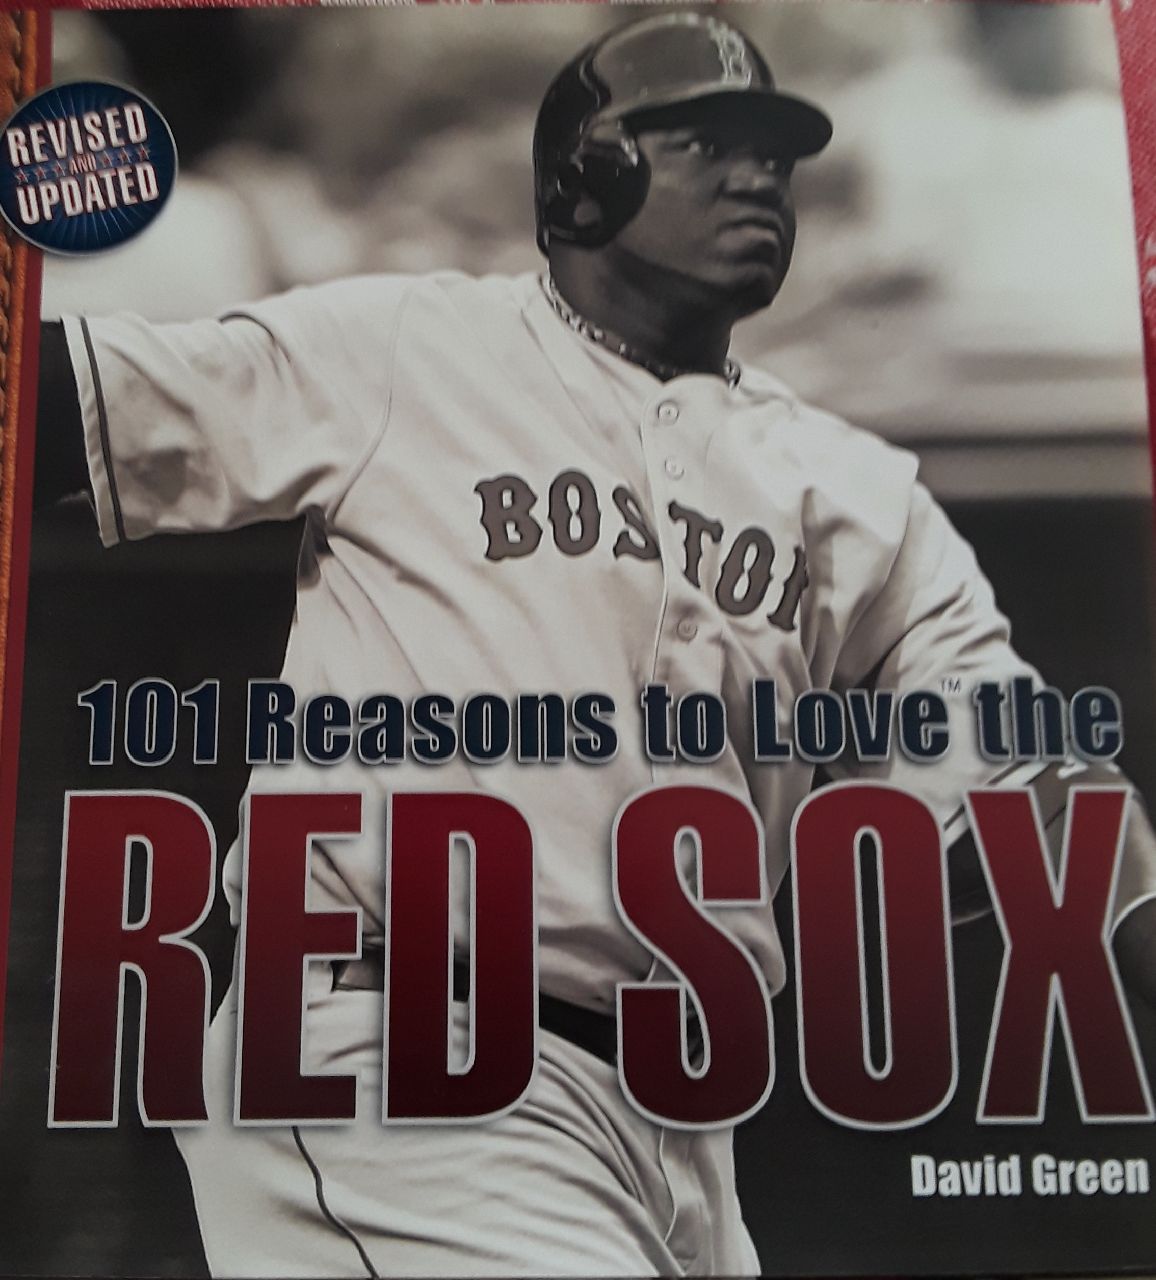 RedSox....100 Things to LOVE about them...